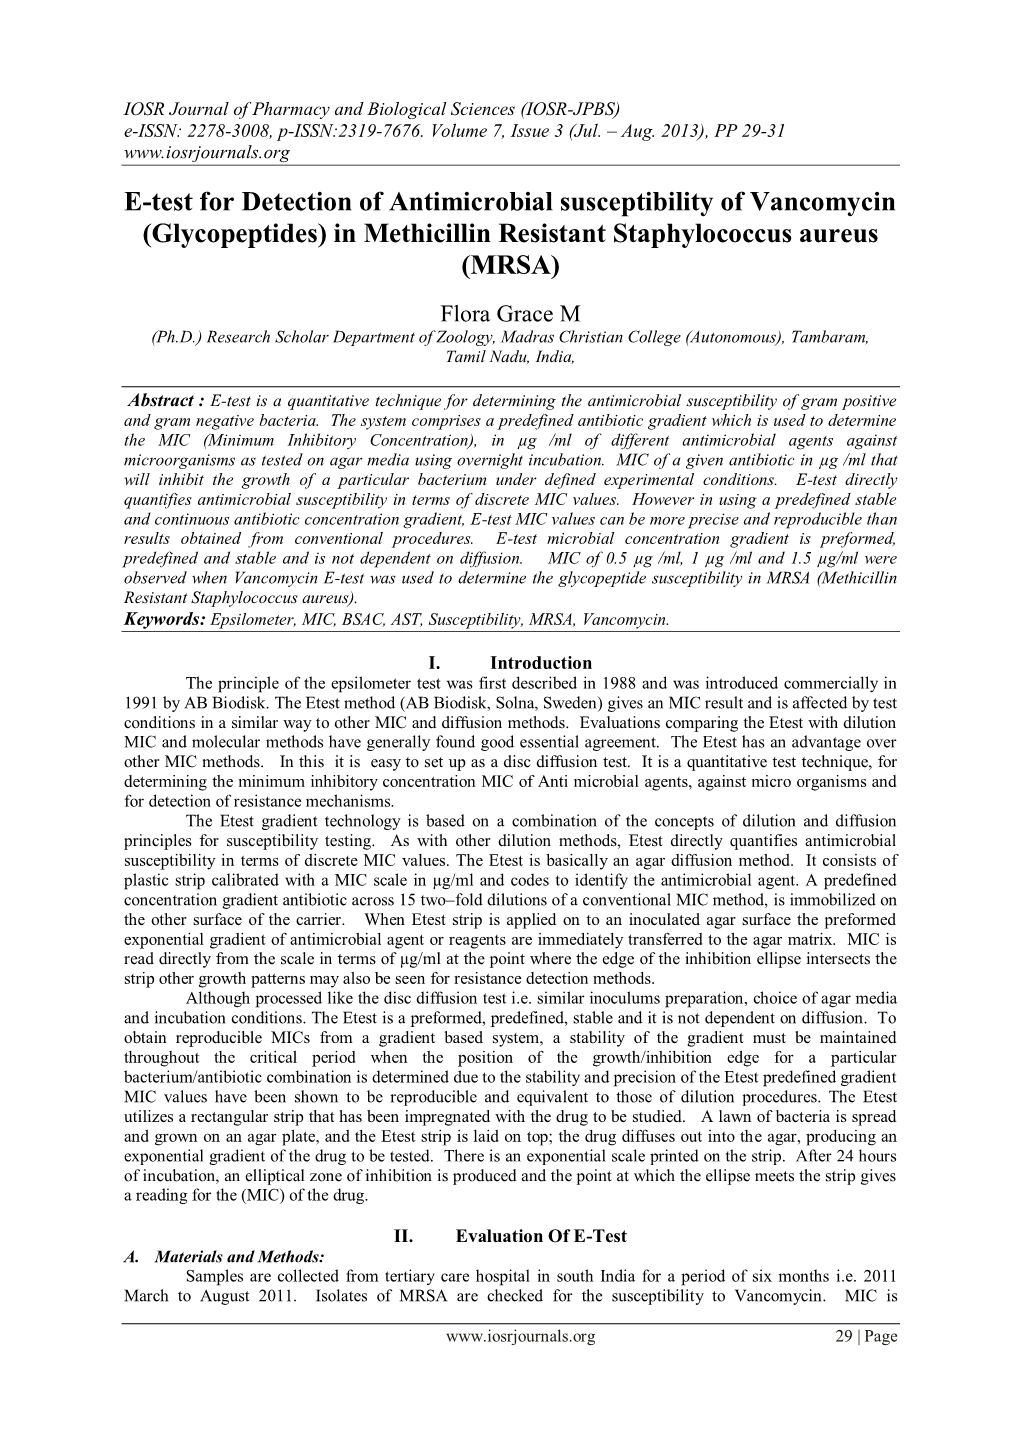 E-Test for Detection of Antimicrobial Susceptibility of Vancomycin (Glycopeptides) in Methicillin Resistant Staphylococcus Aureus (MRSA)